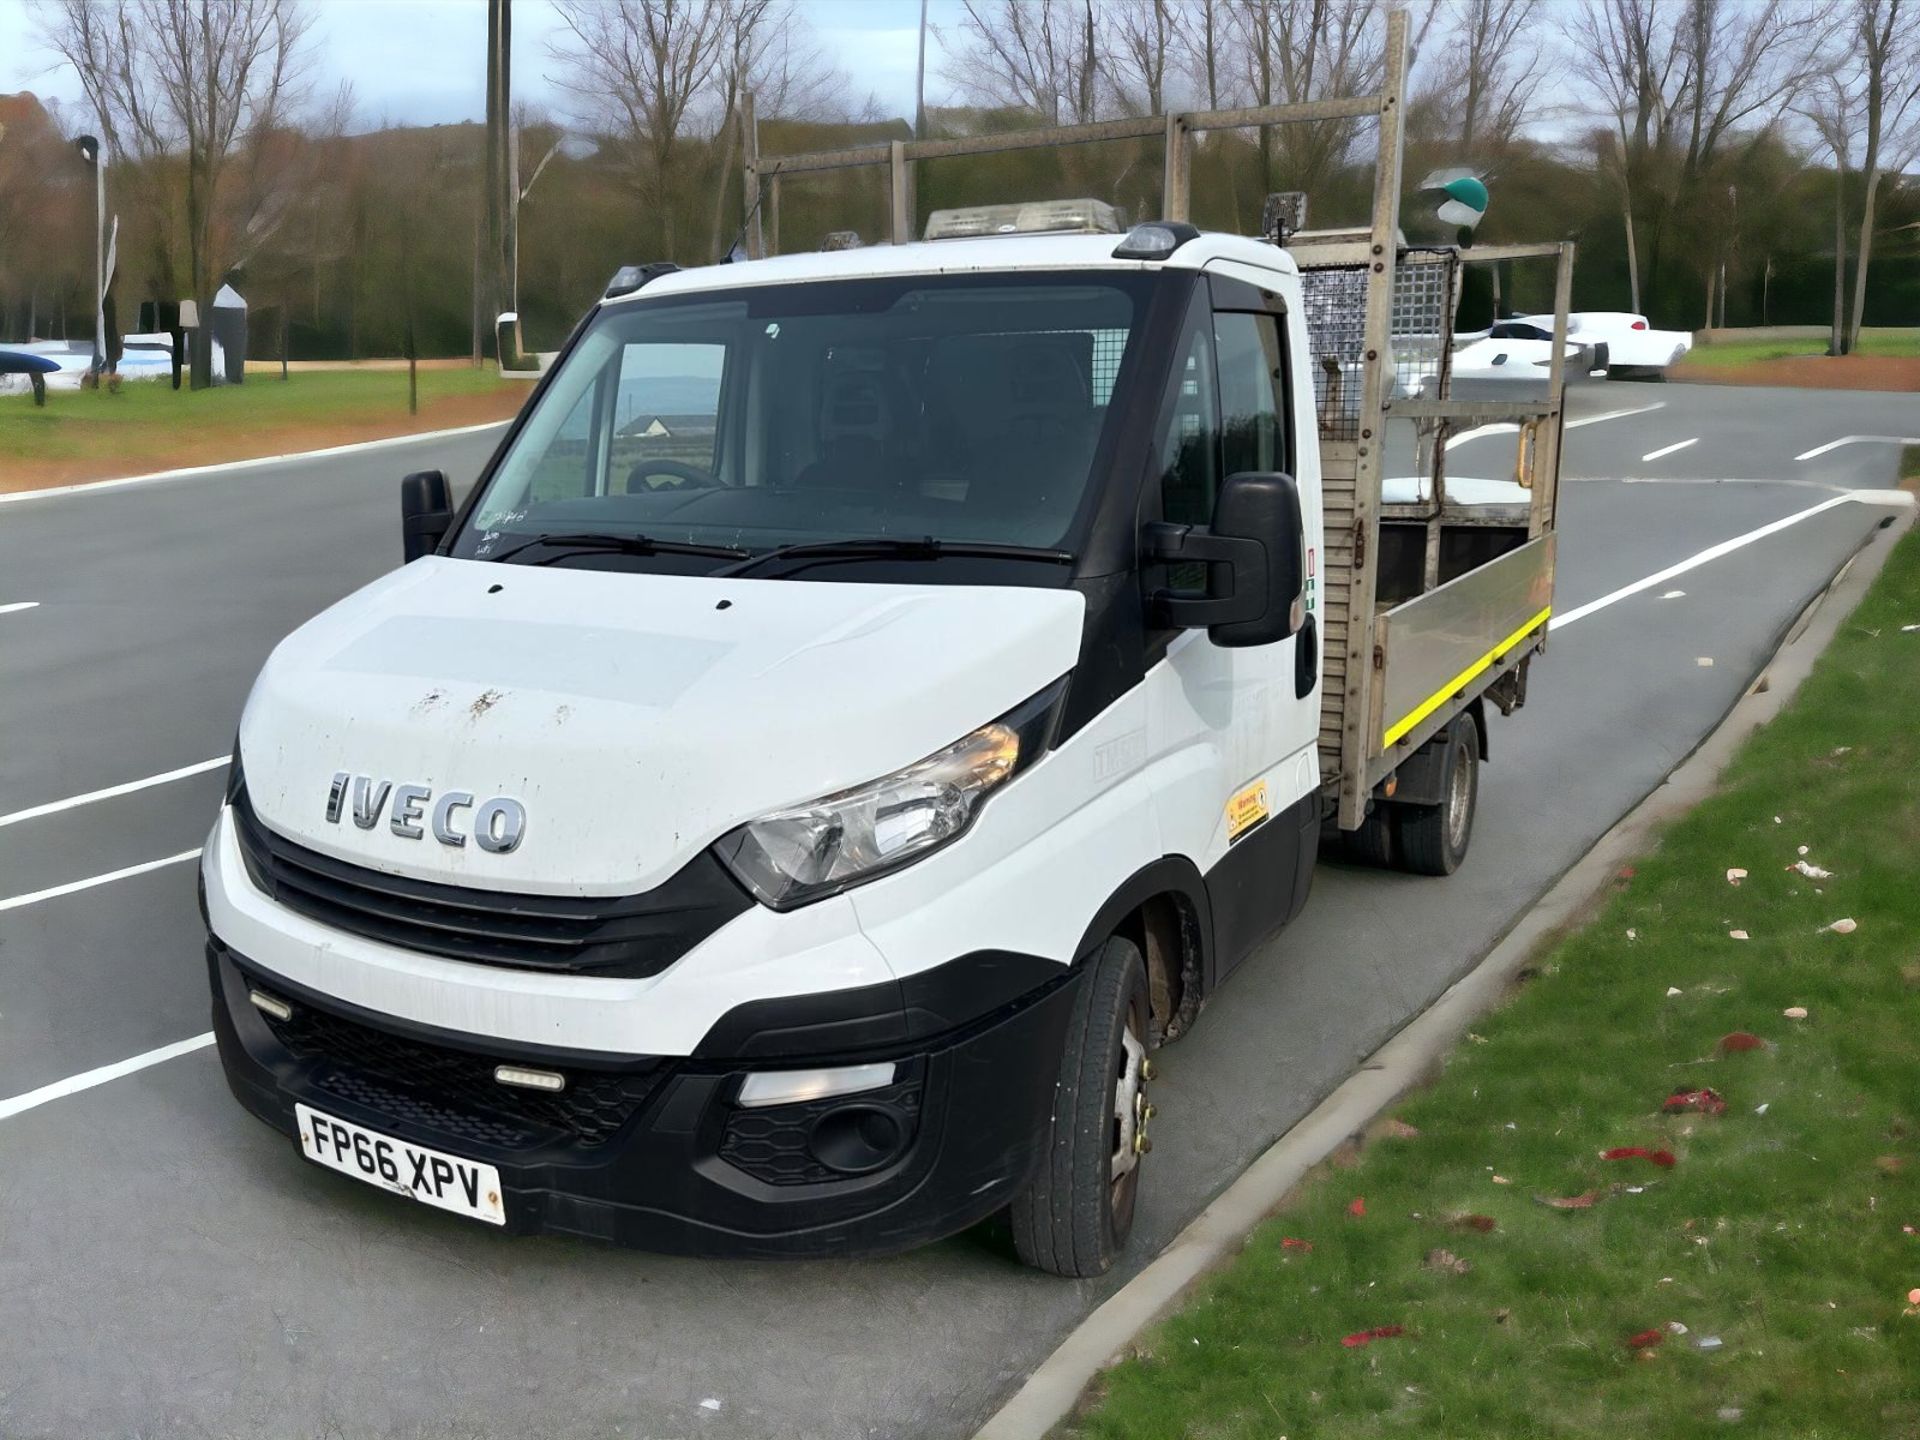 2016-66 REG IVECO DAILY DROP SIDE 35C13 - HPI CLEAR - READY TO GO!